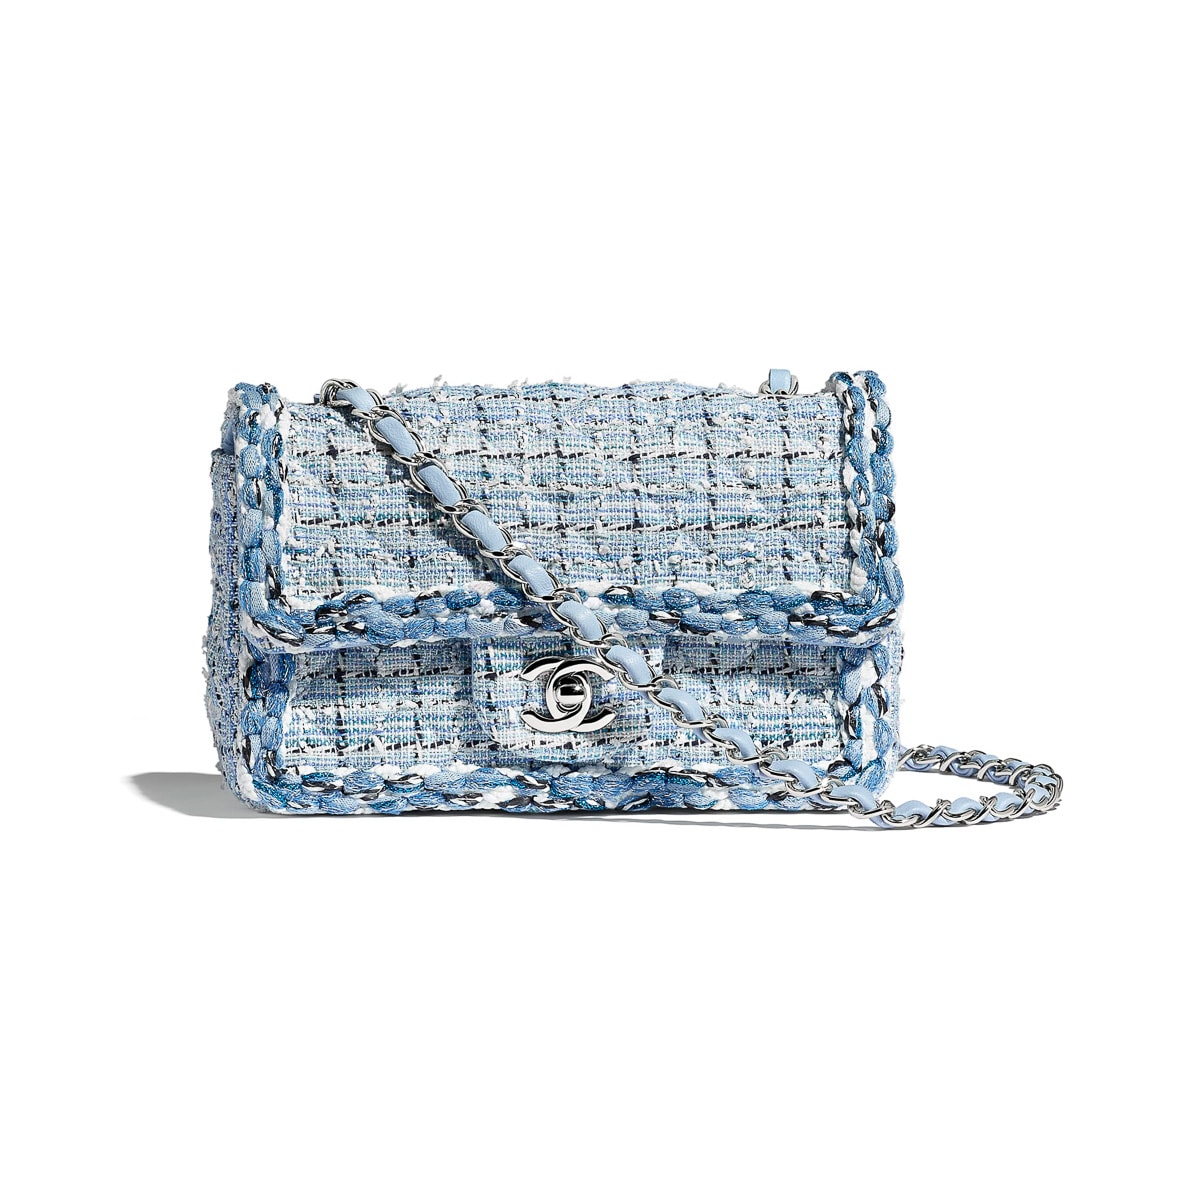 We&#39;ve Got Over 100 Pics + Prices of Chanel’s Nautical-Inspired Cruise 2019 Bags - PurseBlog